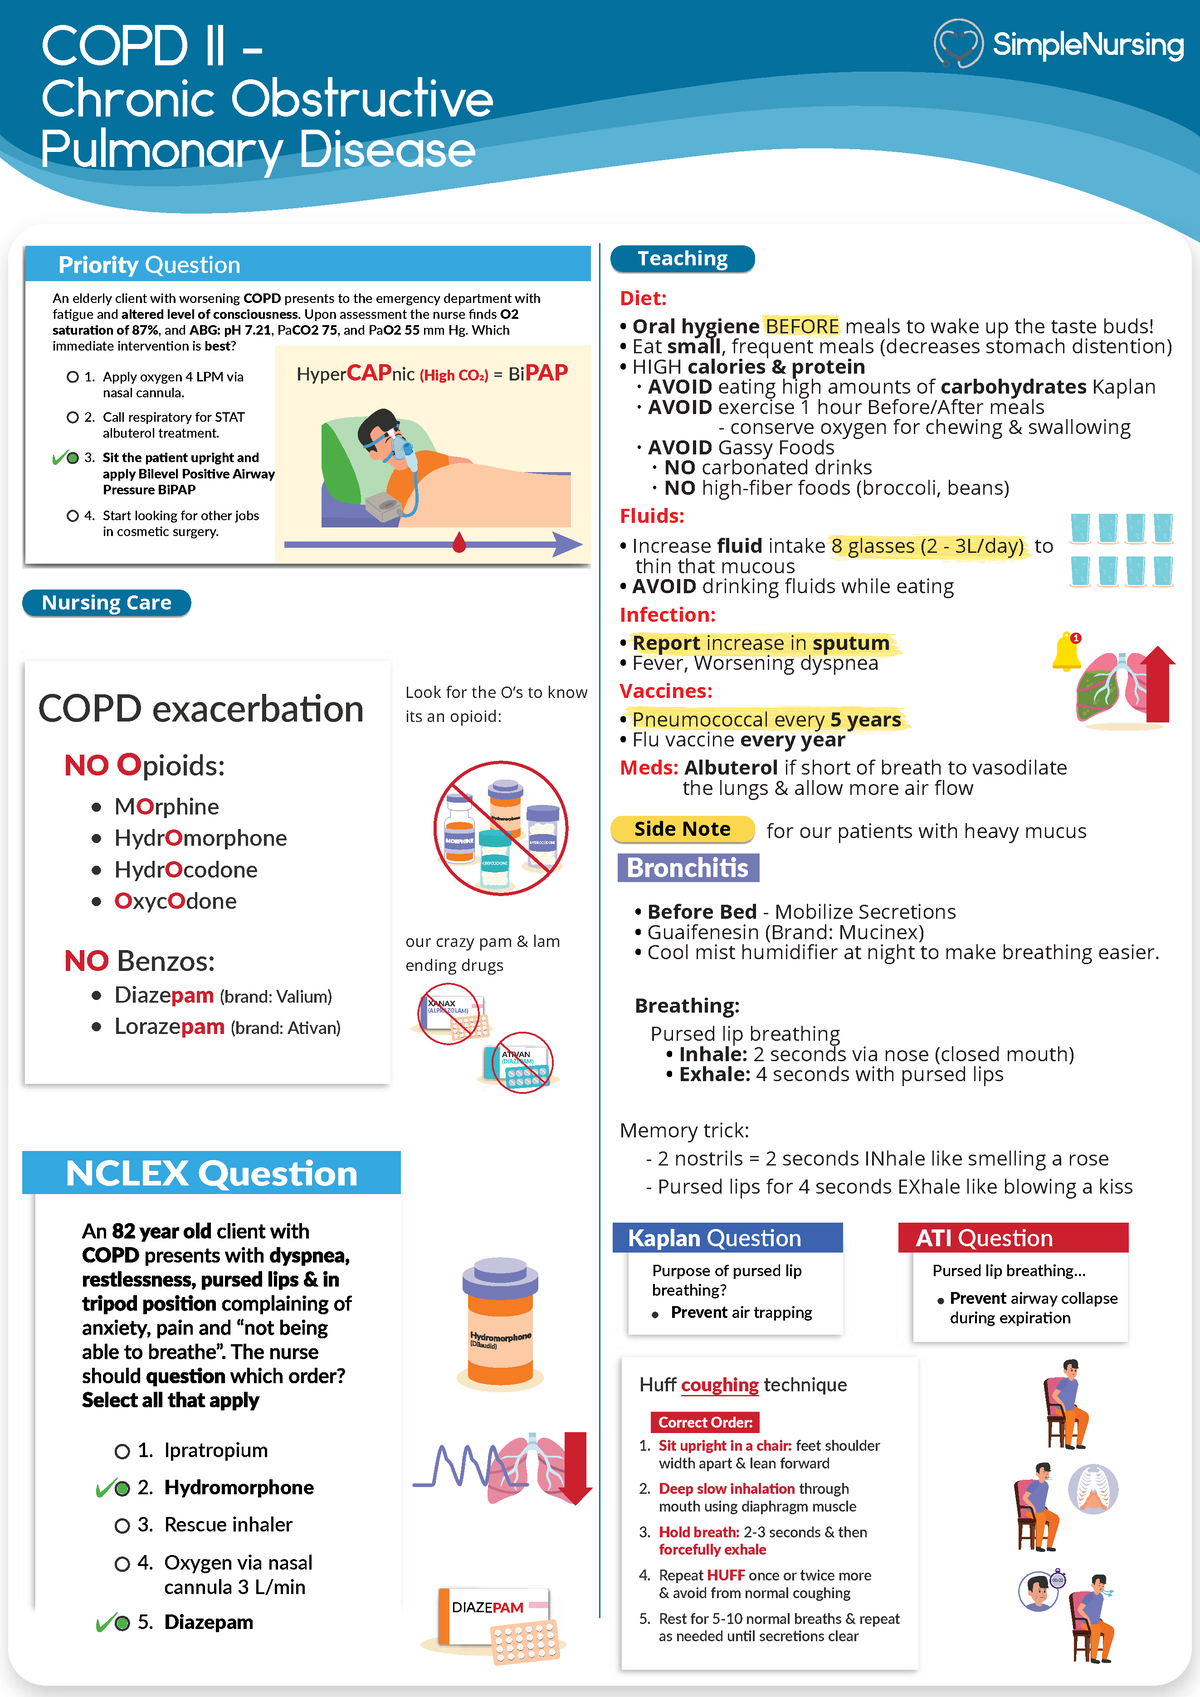 9 Ways to Improve Quality of Life With COPD